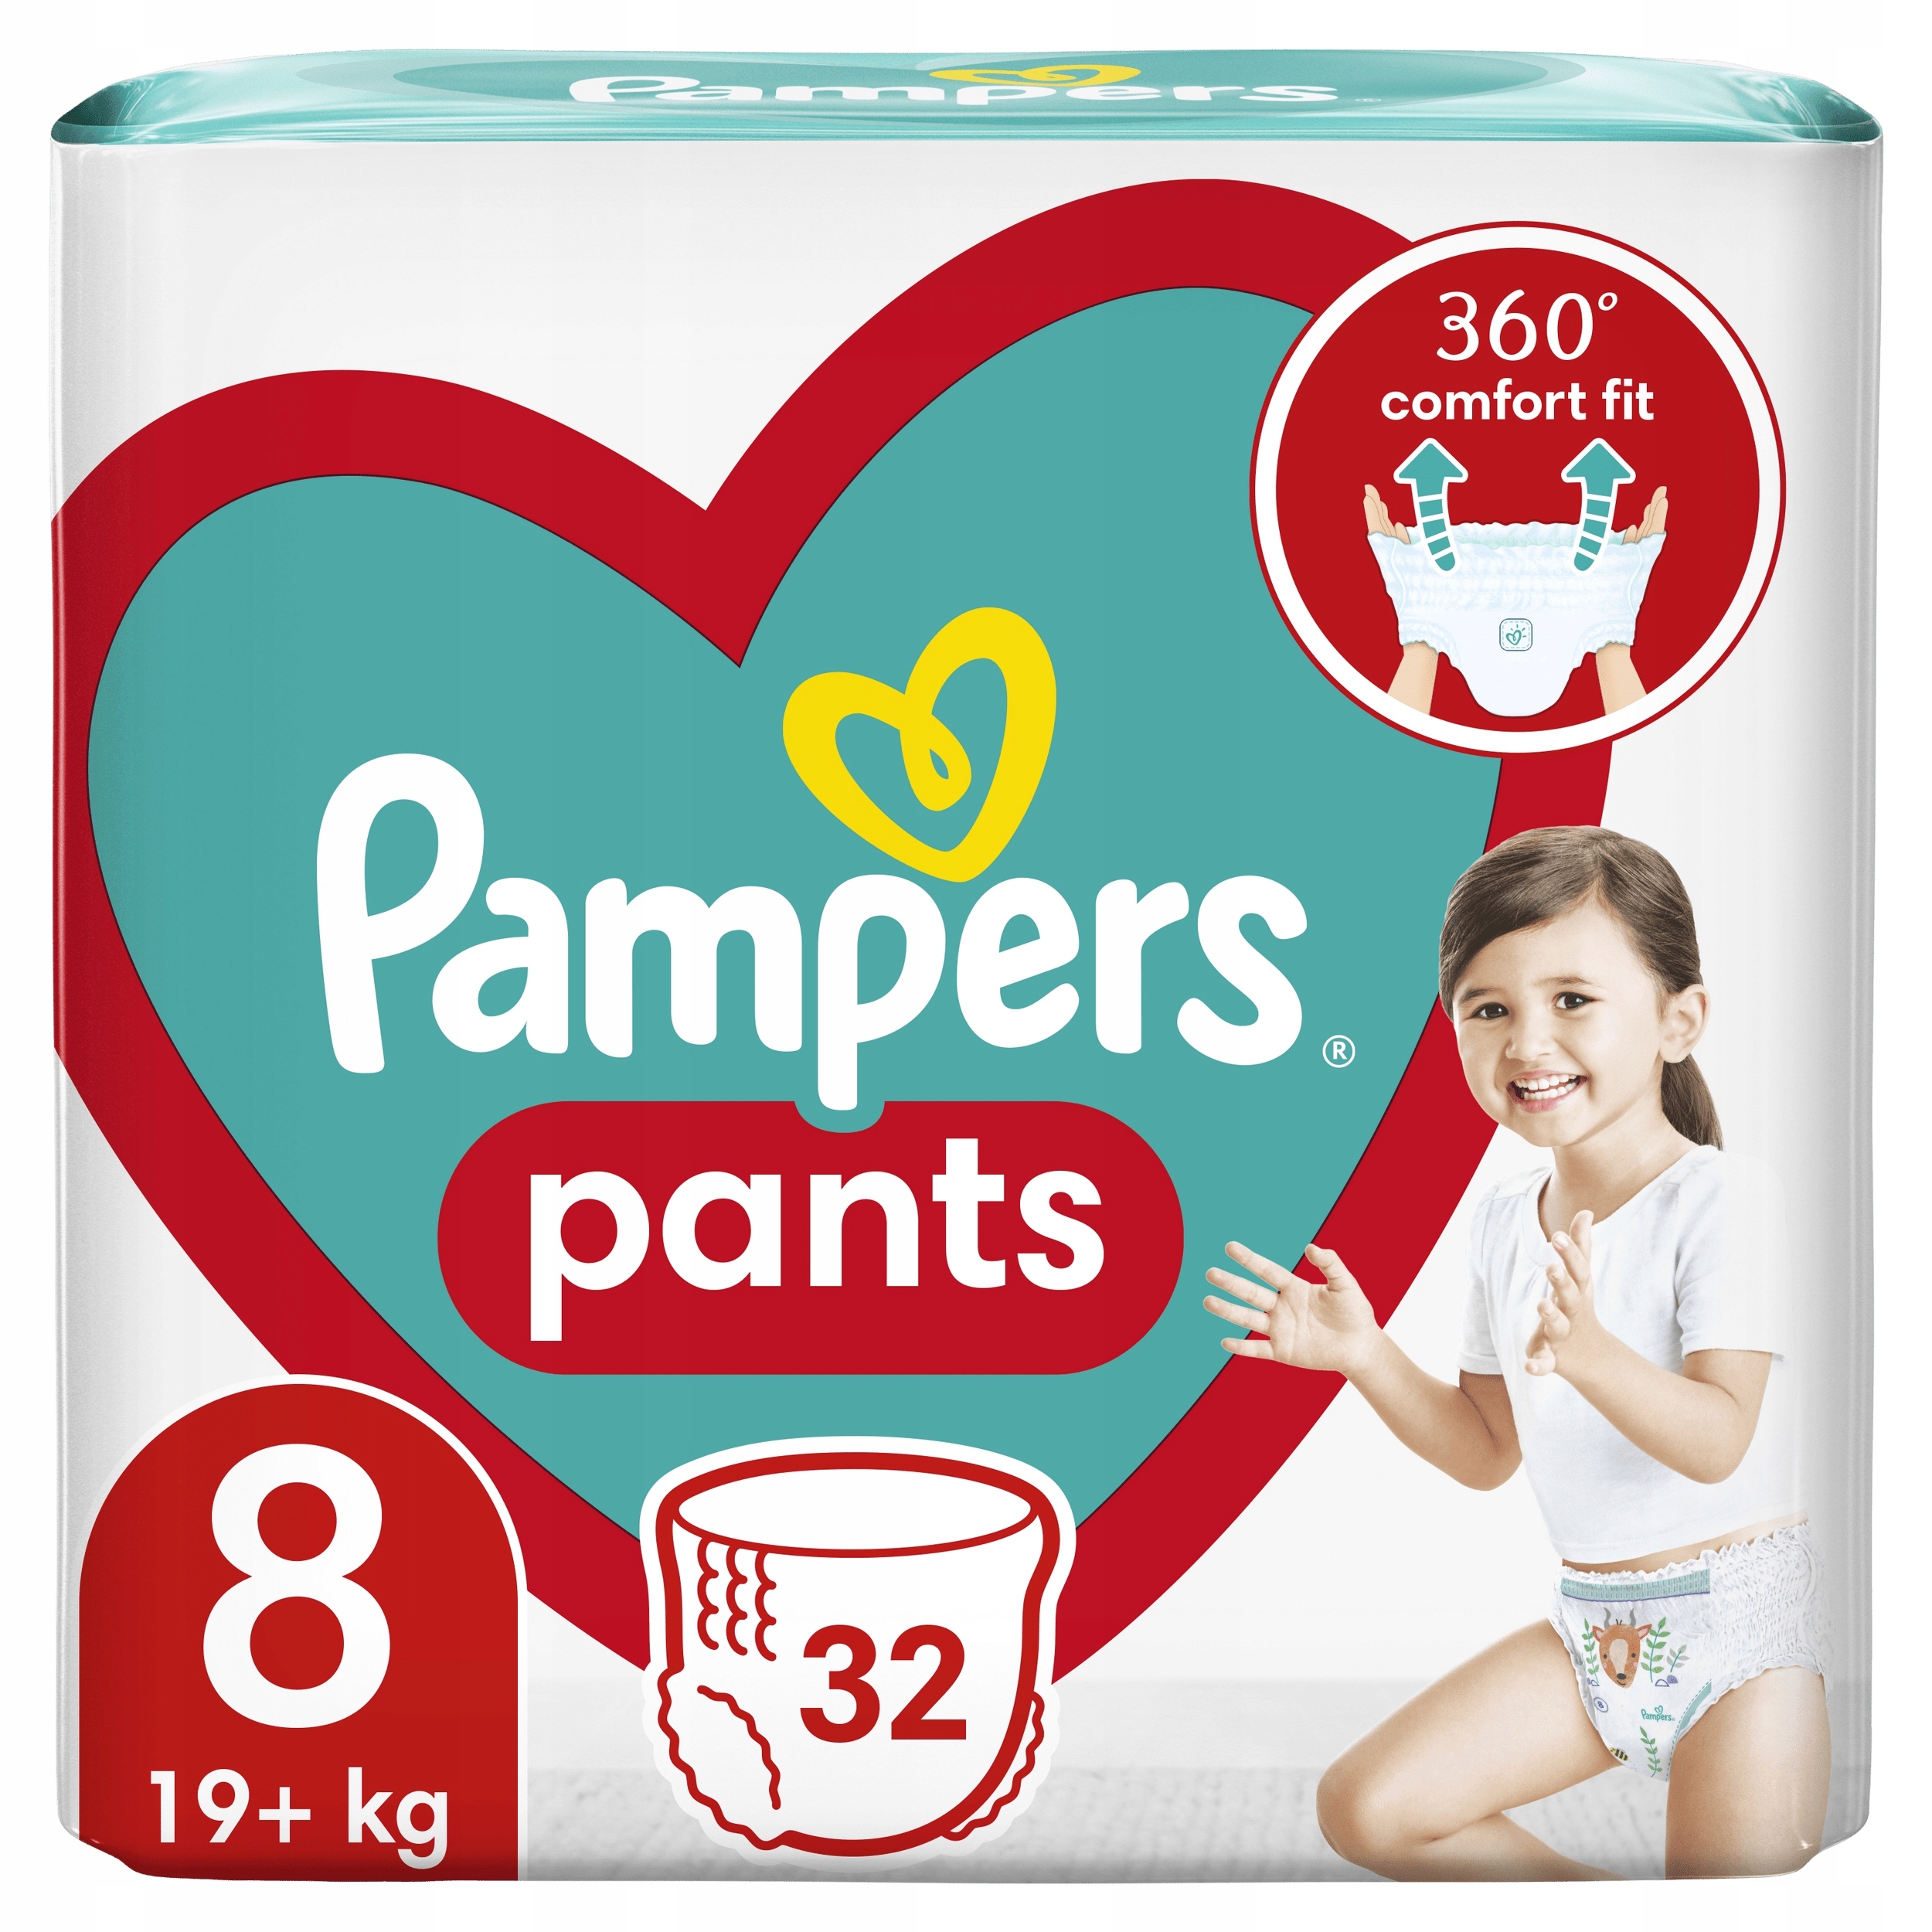 pampers active 6